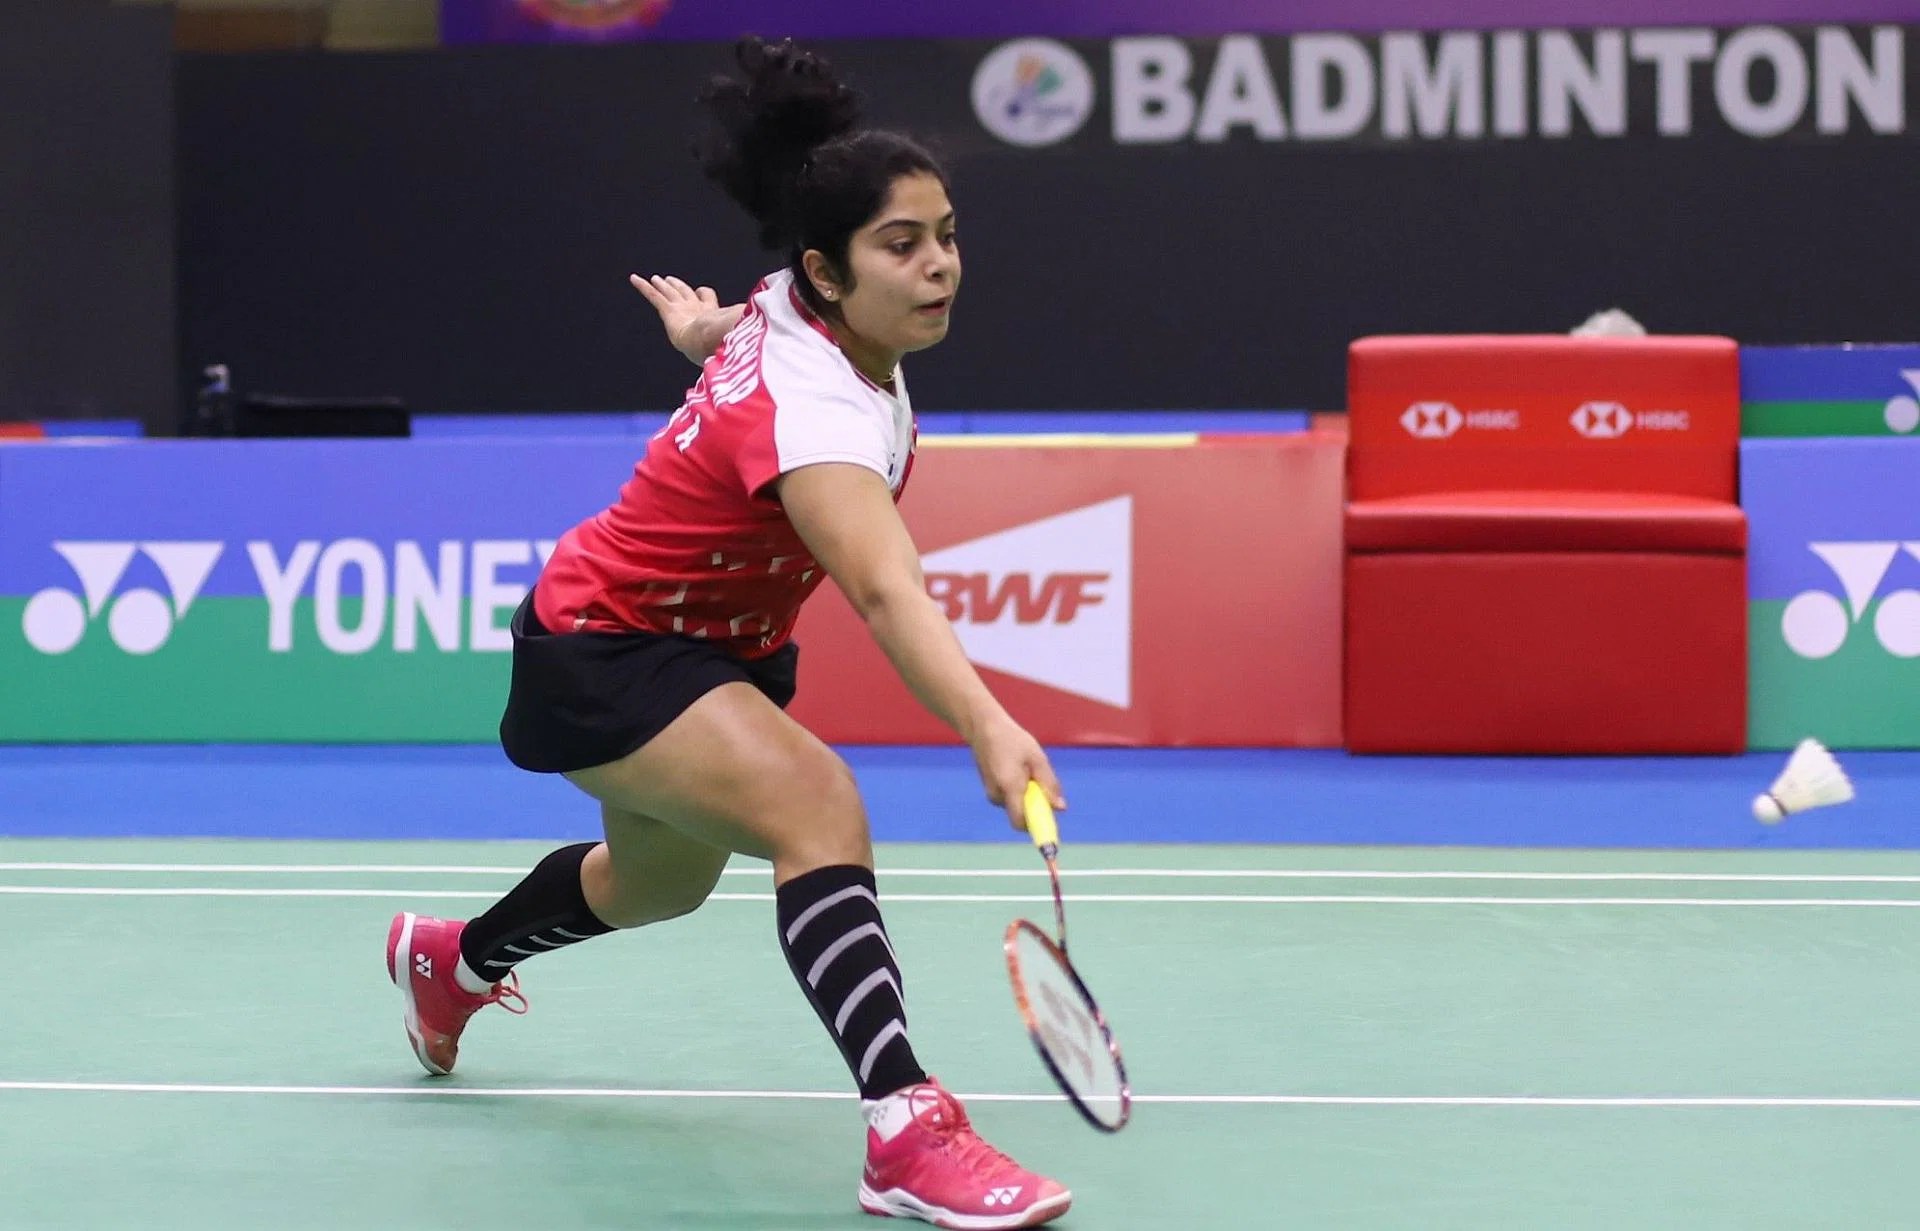 Uber Cup LIVE: PV Sindhu led Team India faces stern Thailand challenge in quarterfinals of Uber Cup - Follow India vs Thailand LIVE updates 